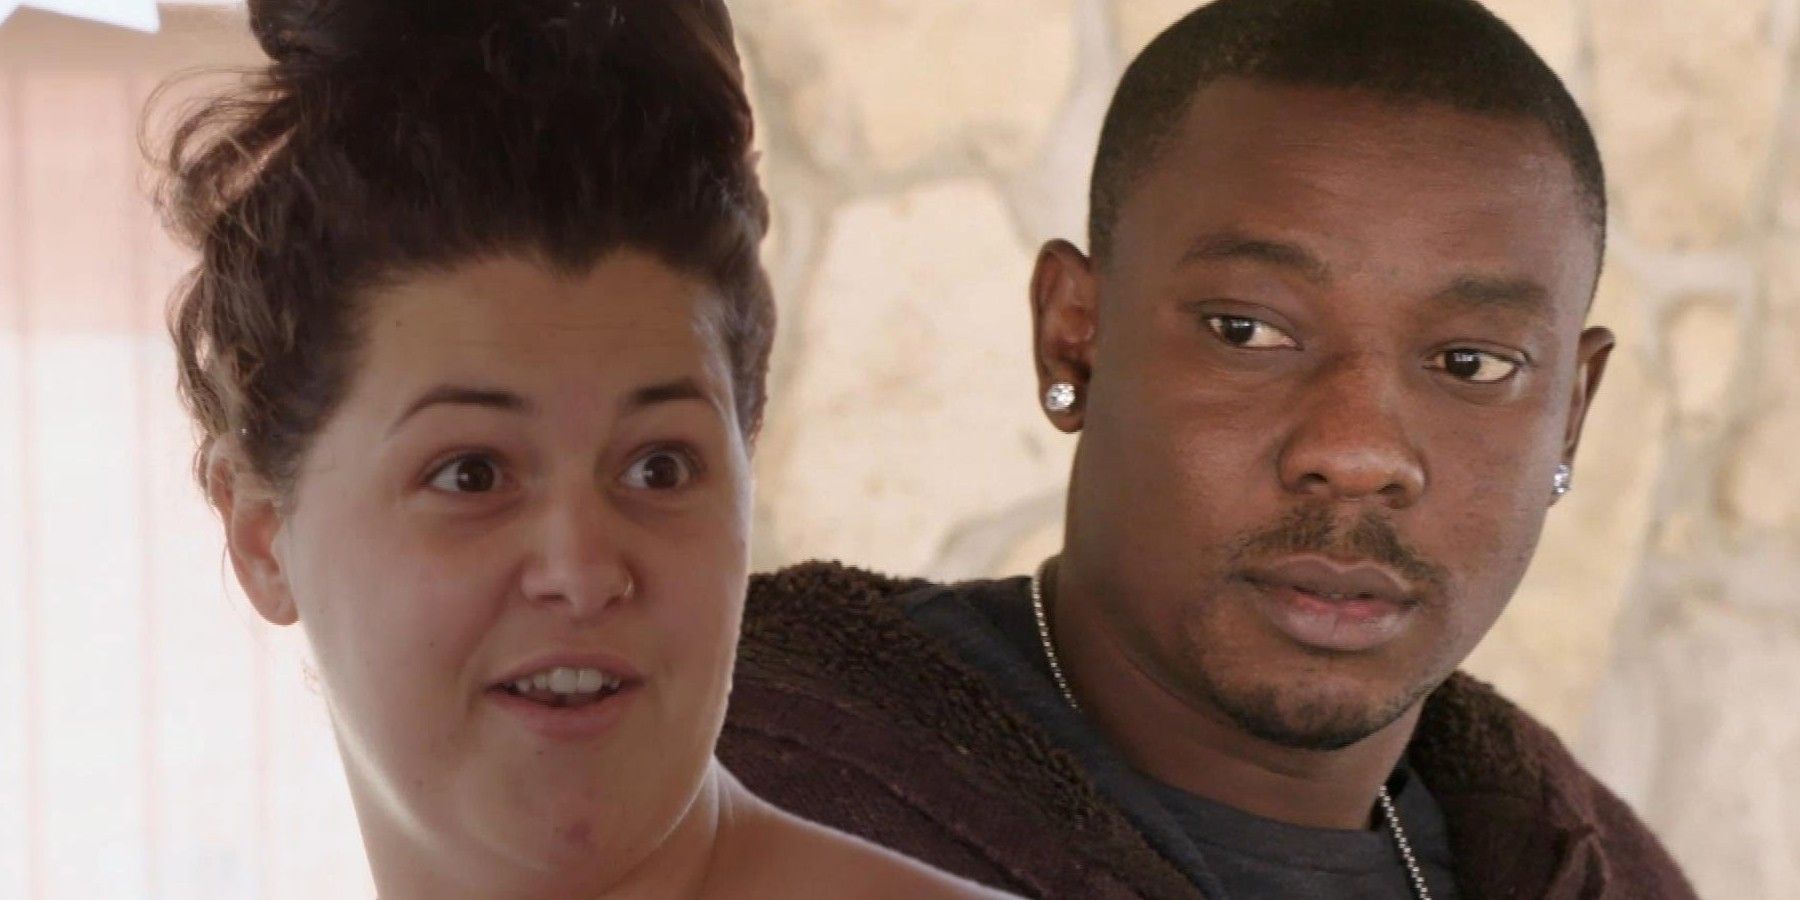 90 Day Fiancé: What Task Does Kobe Blaise Do For A Residing?